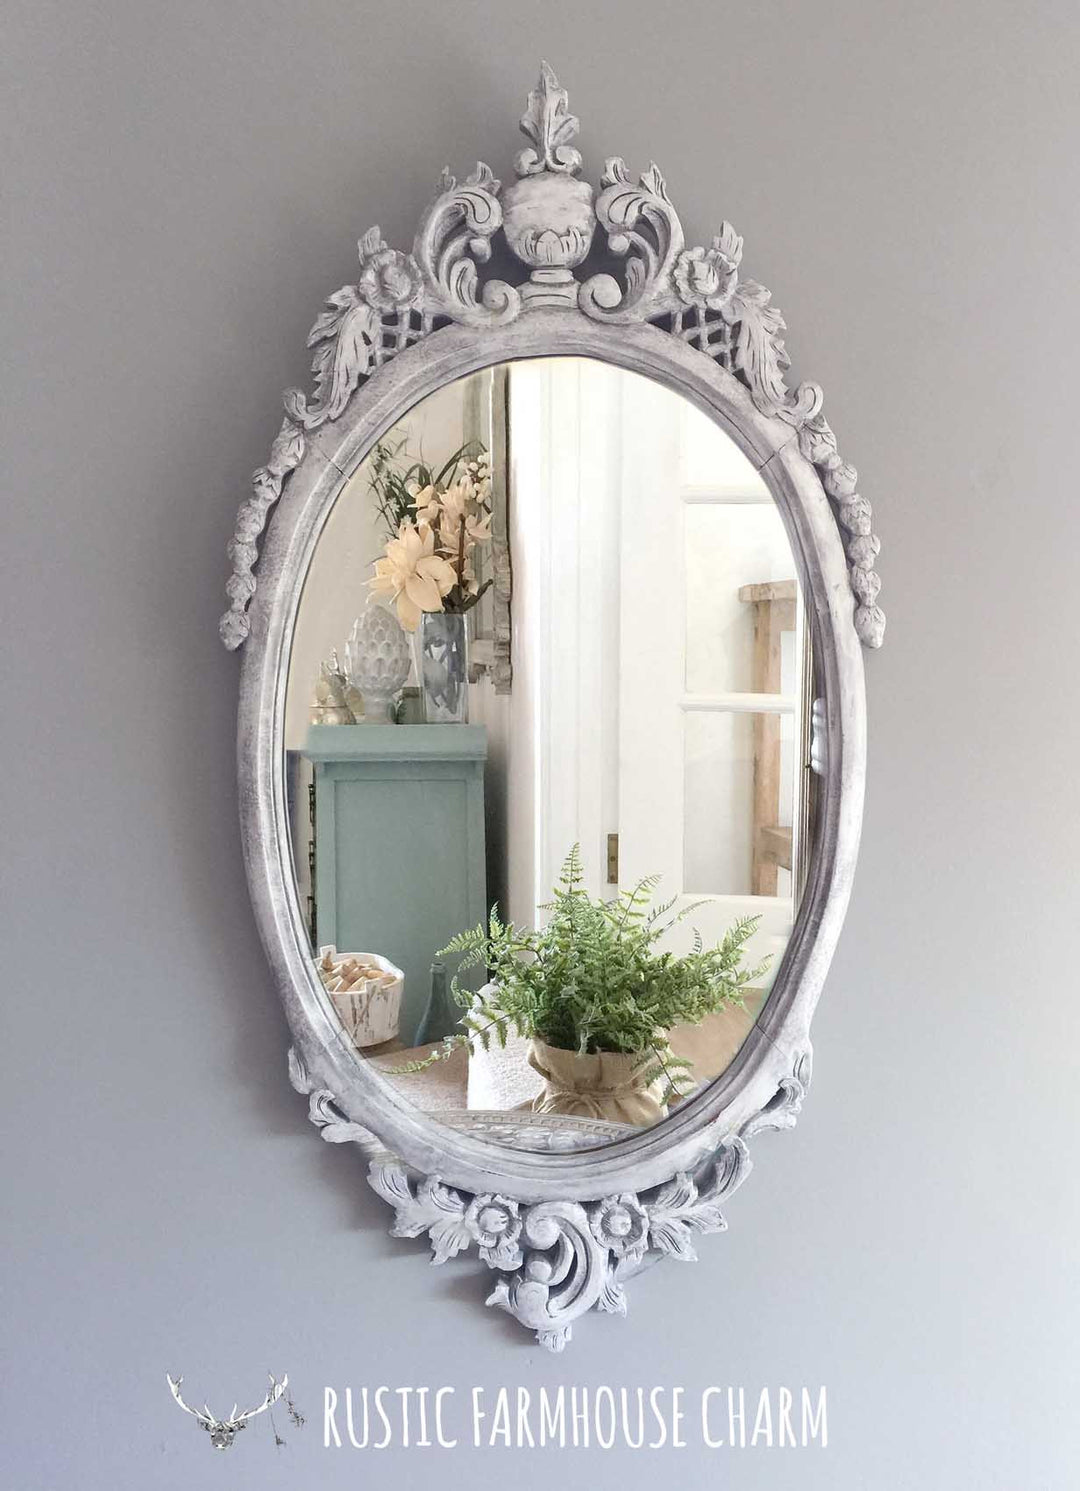 Large Ornately Carved Oval Mirror - Rustic Farmhouse Charm